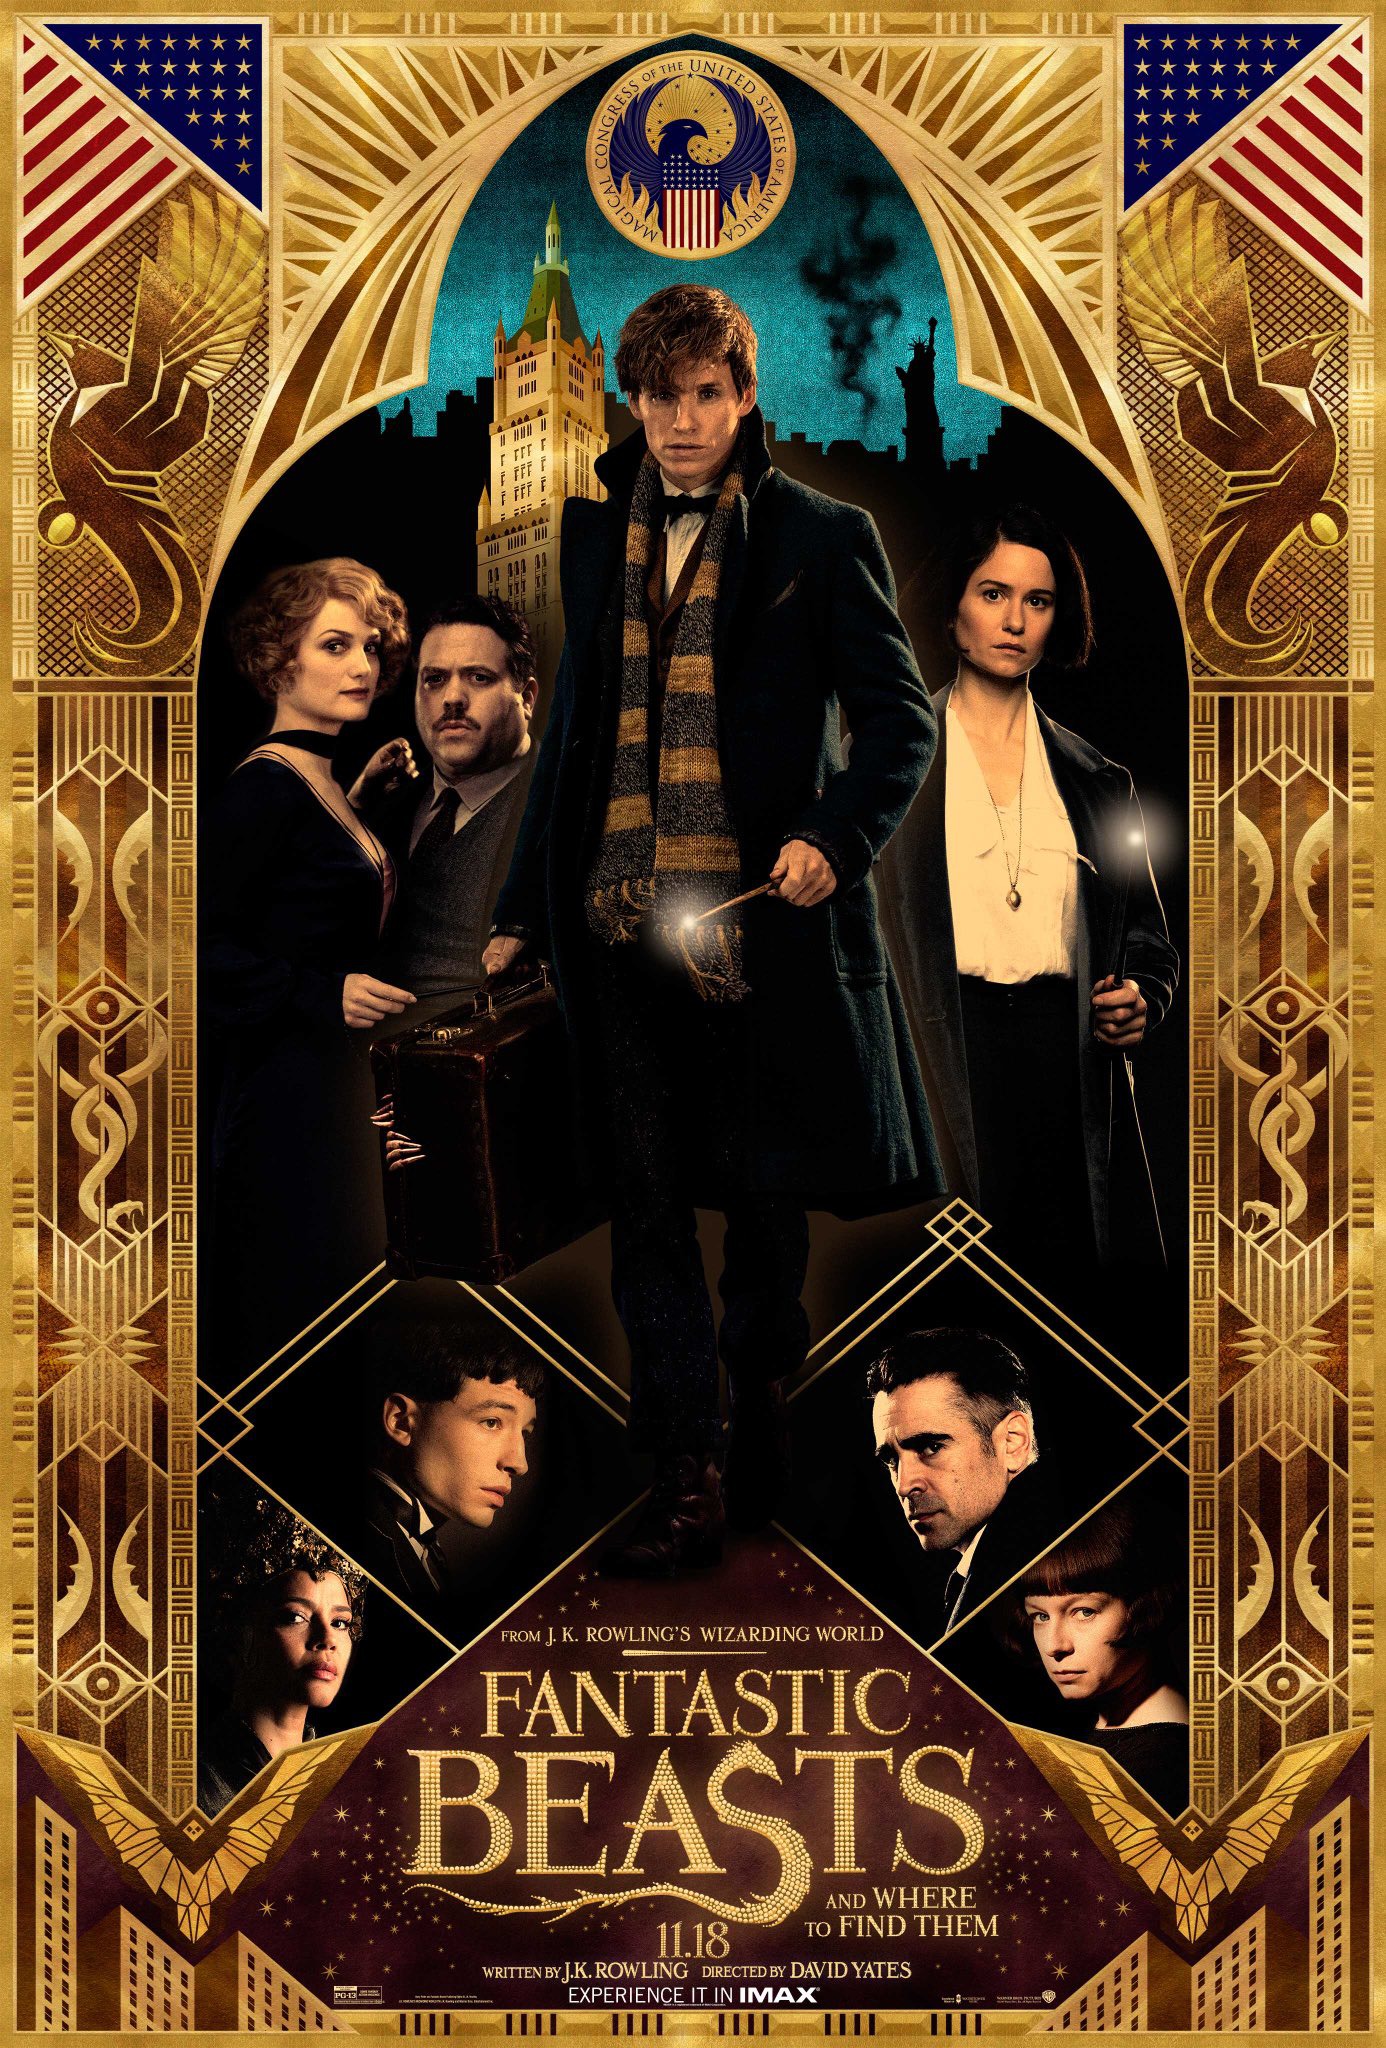 Online Movie Watch Fantastic Beasts And Where To Find Them 2016